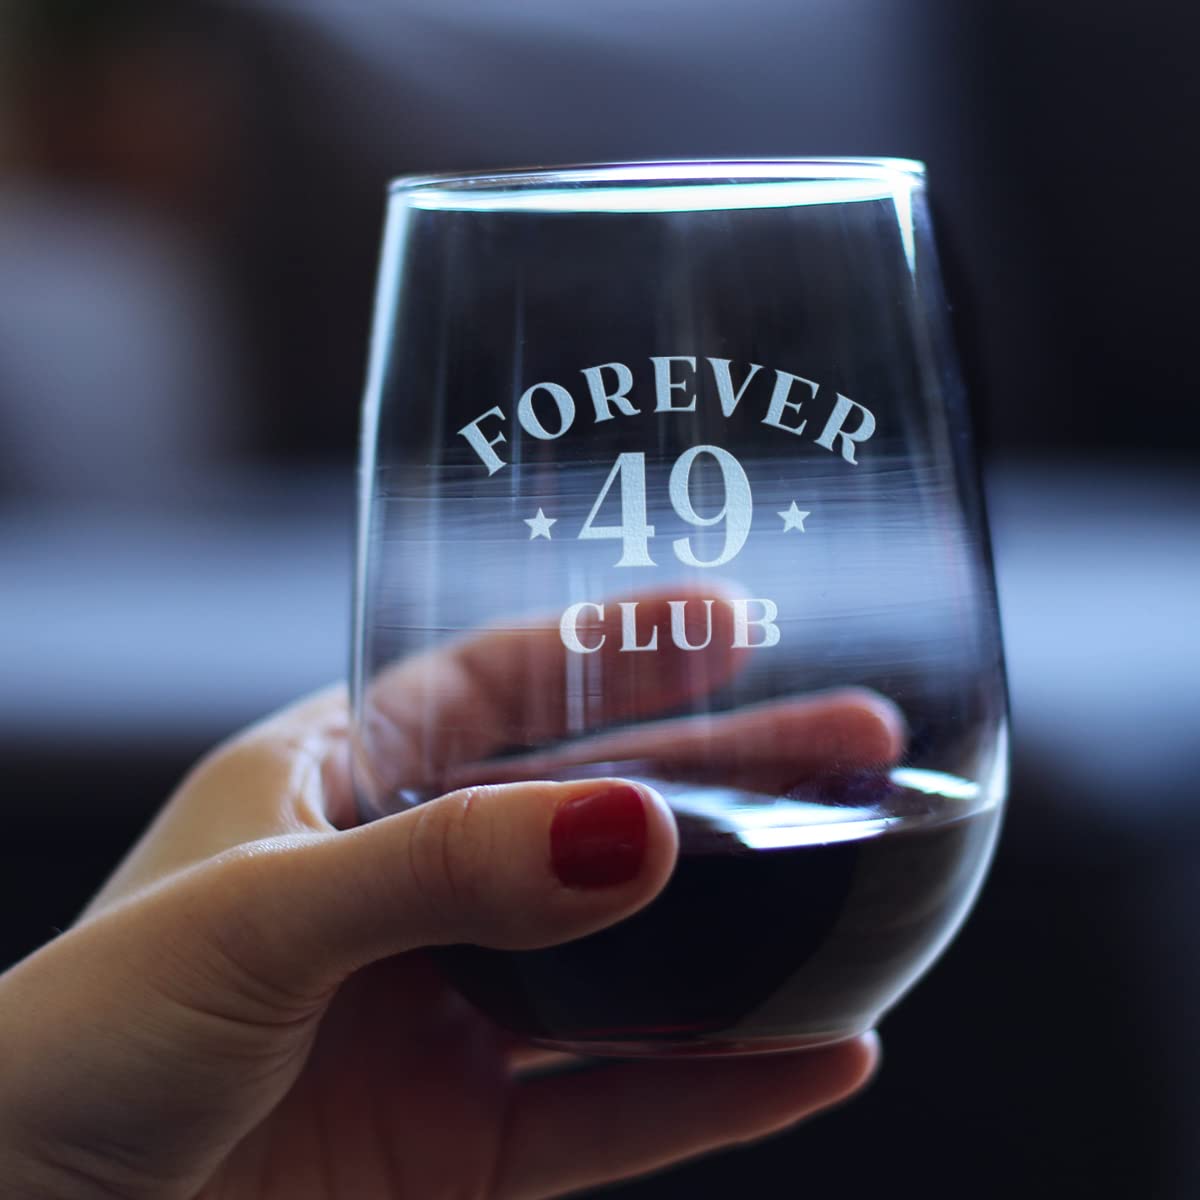 Forever 49 Club - Stemless Wine Glass 50th Birthday Gifts for Women & Men Turning 50 - Bday Party Decor - Large 17 Oz Glasses